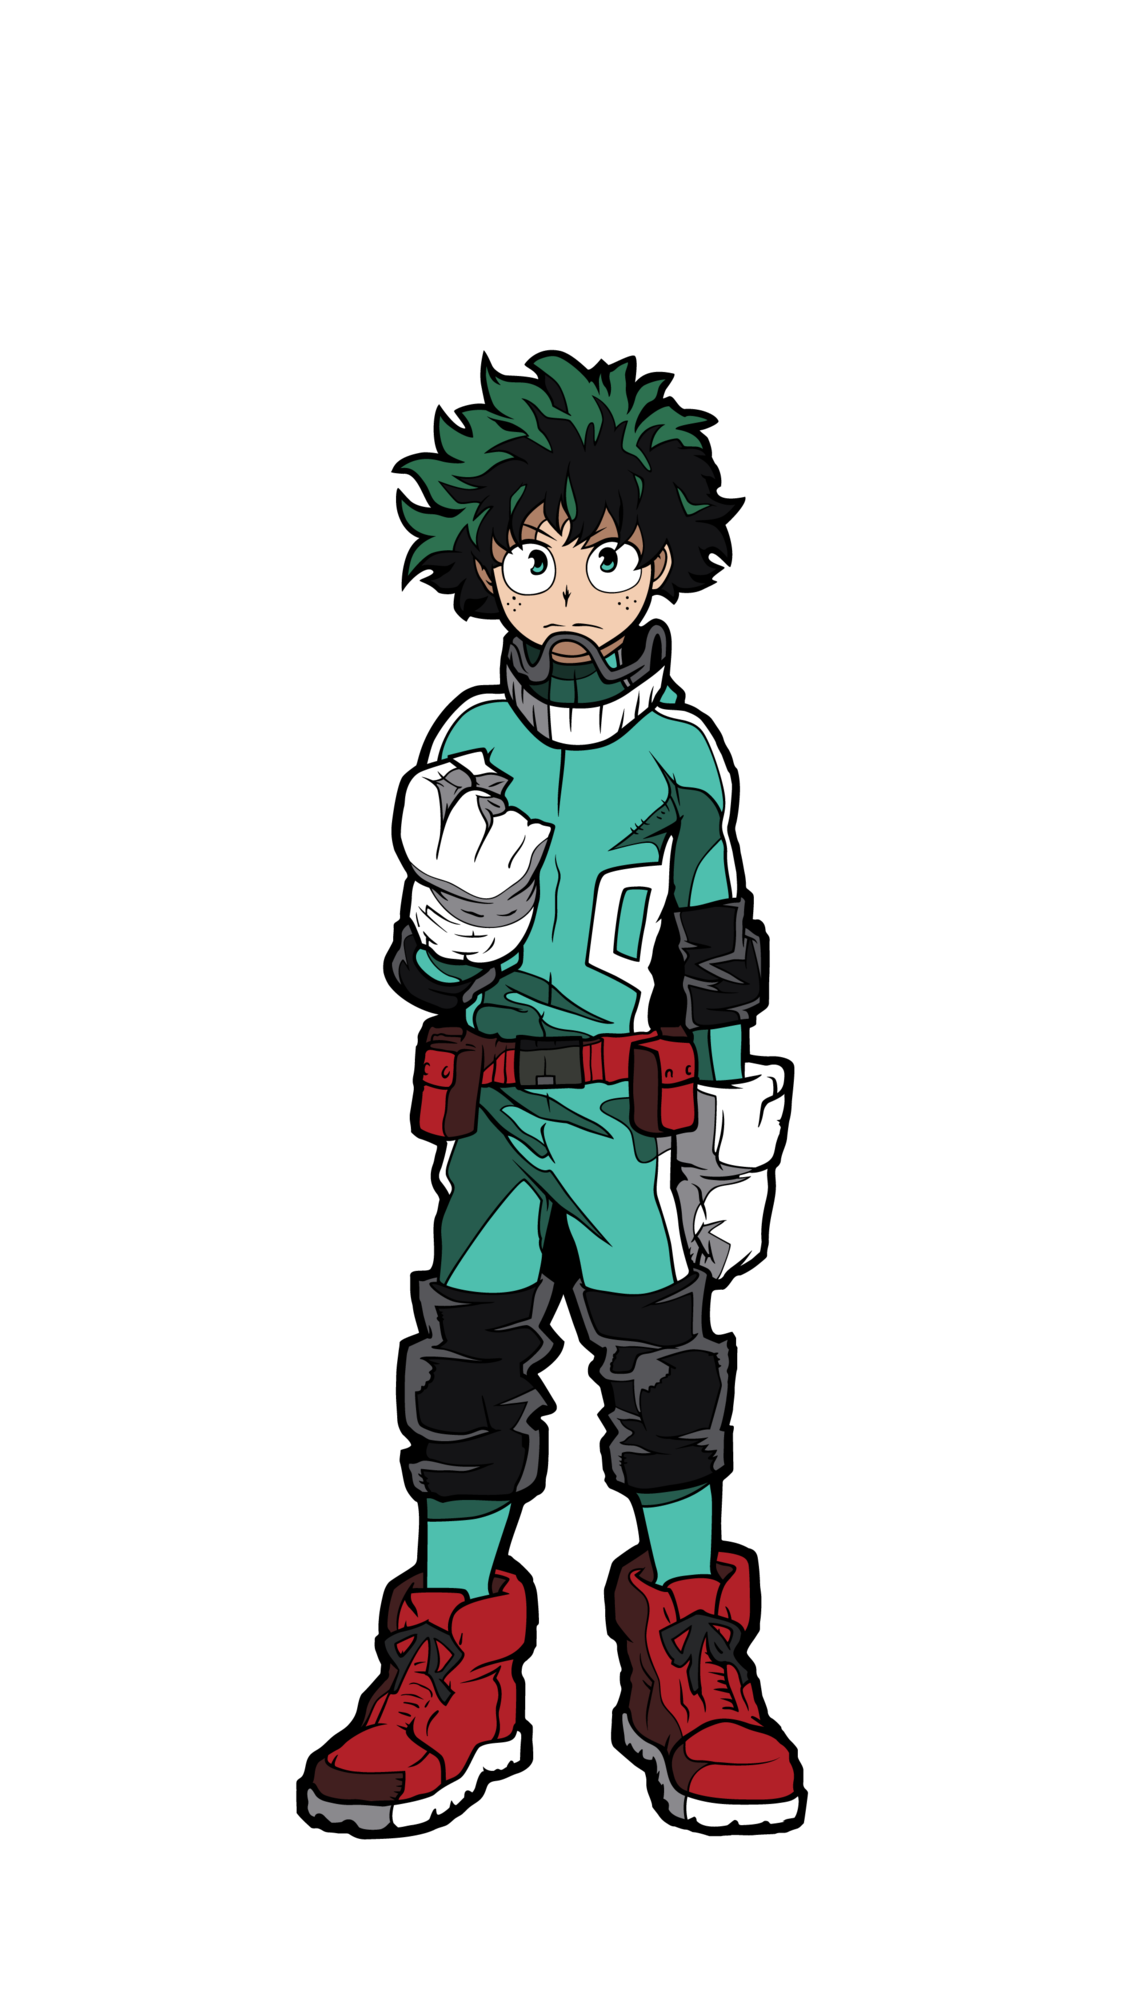 Images Hero Academia My PNG Download Free PNG Image